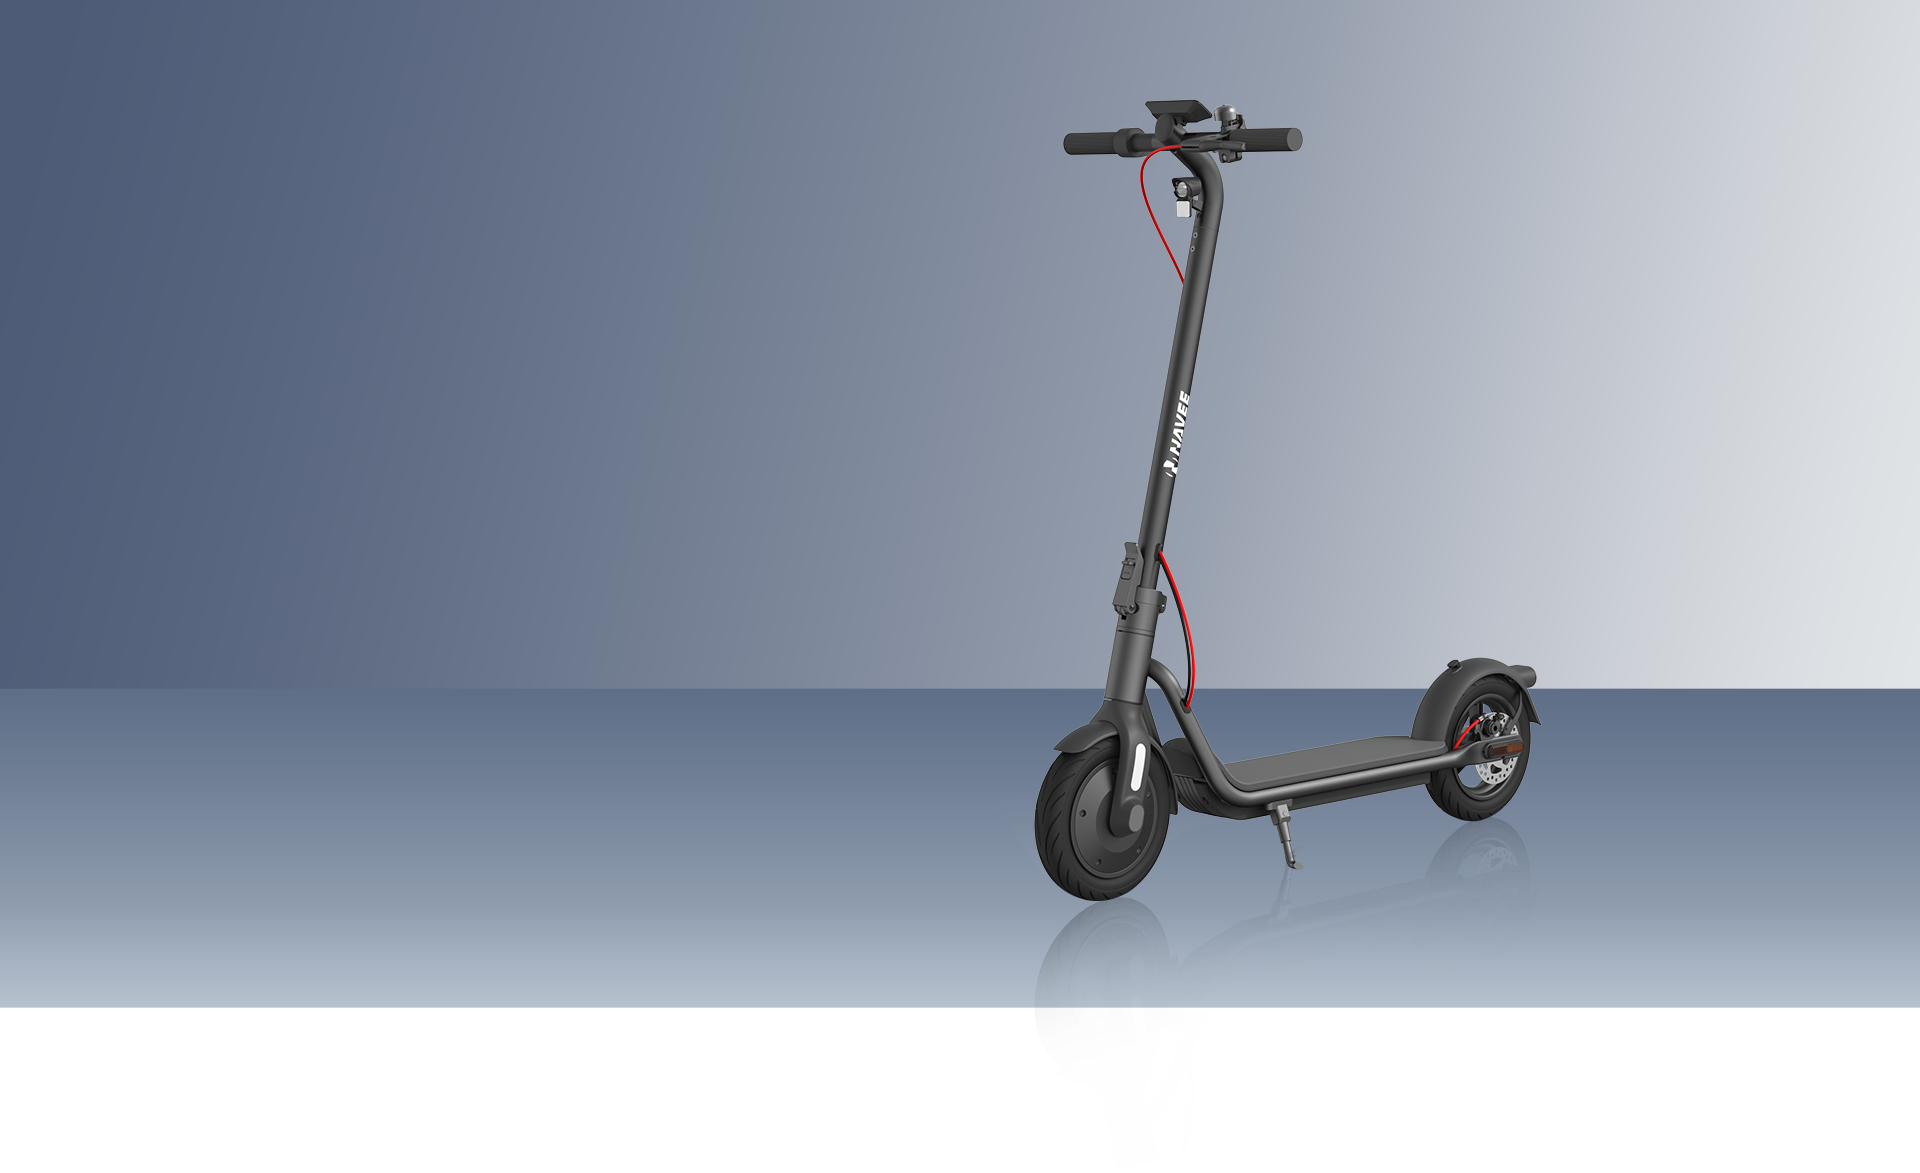 NAVEE launches the V40 e-scooter to enable a premium commute at an affordable price